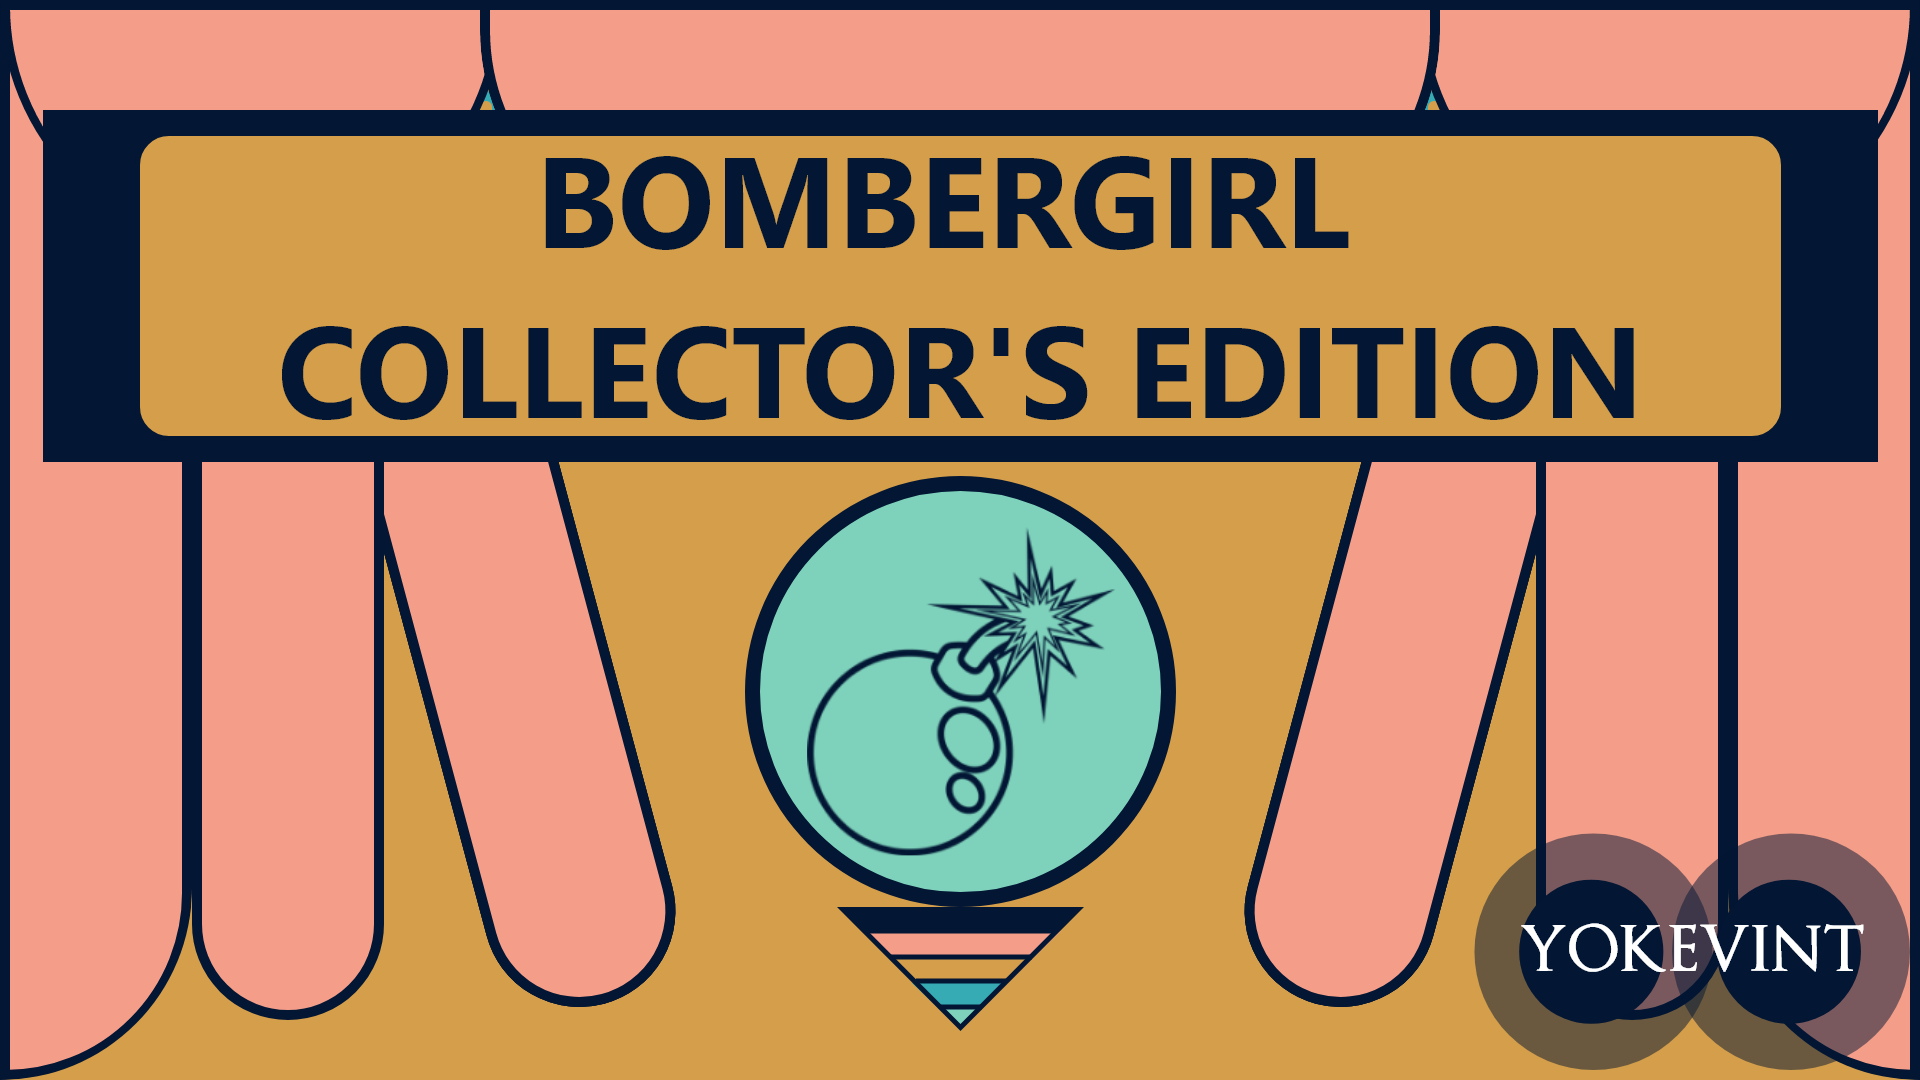 BOMBERGIRL COLLECTOR'S EDITION